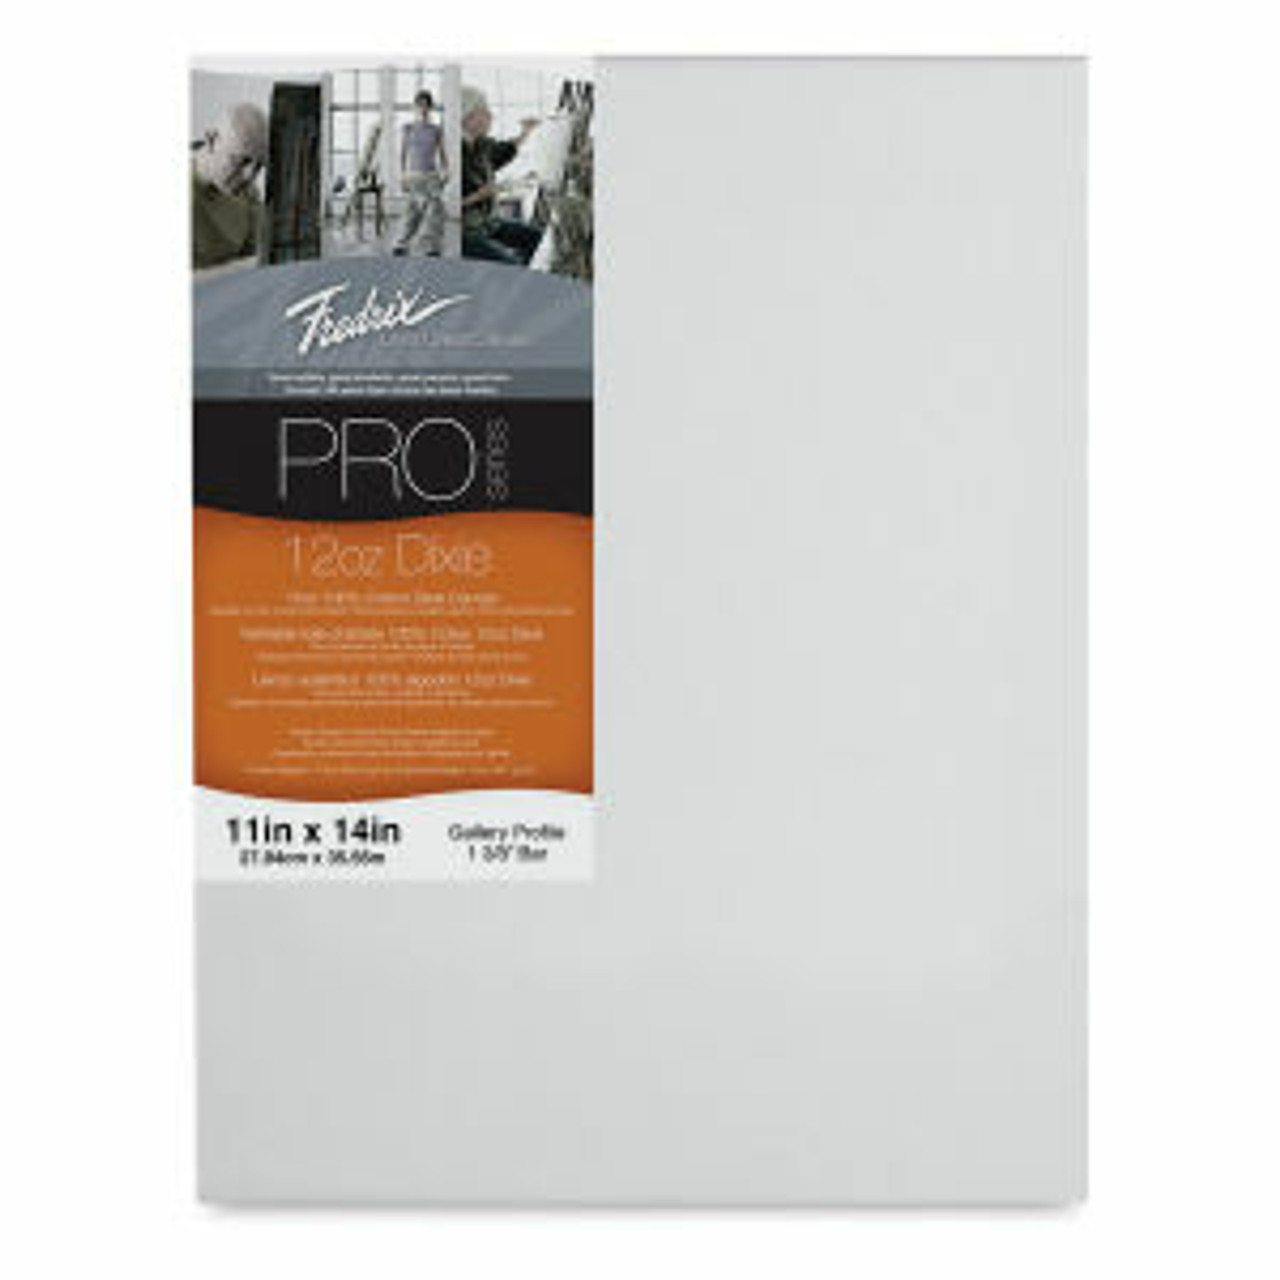 Pro Series 12Oz Dixie Stretched Canvas 11X14 1-3/8 Bars